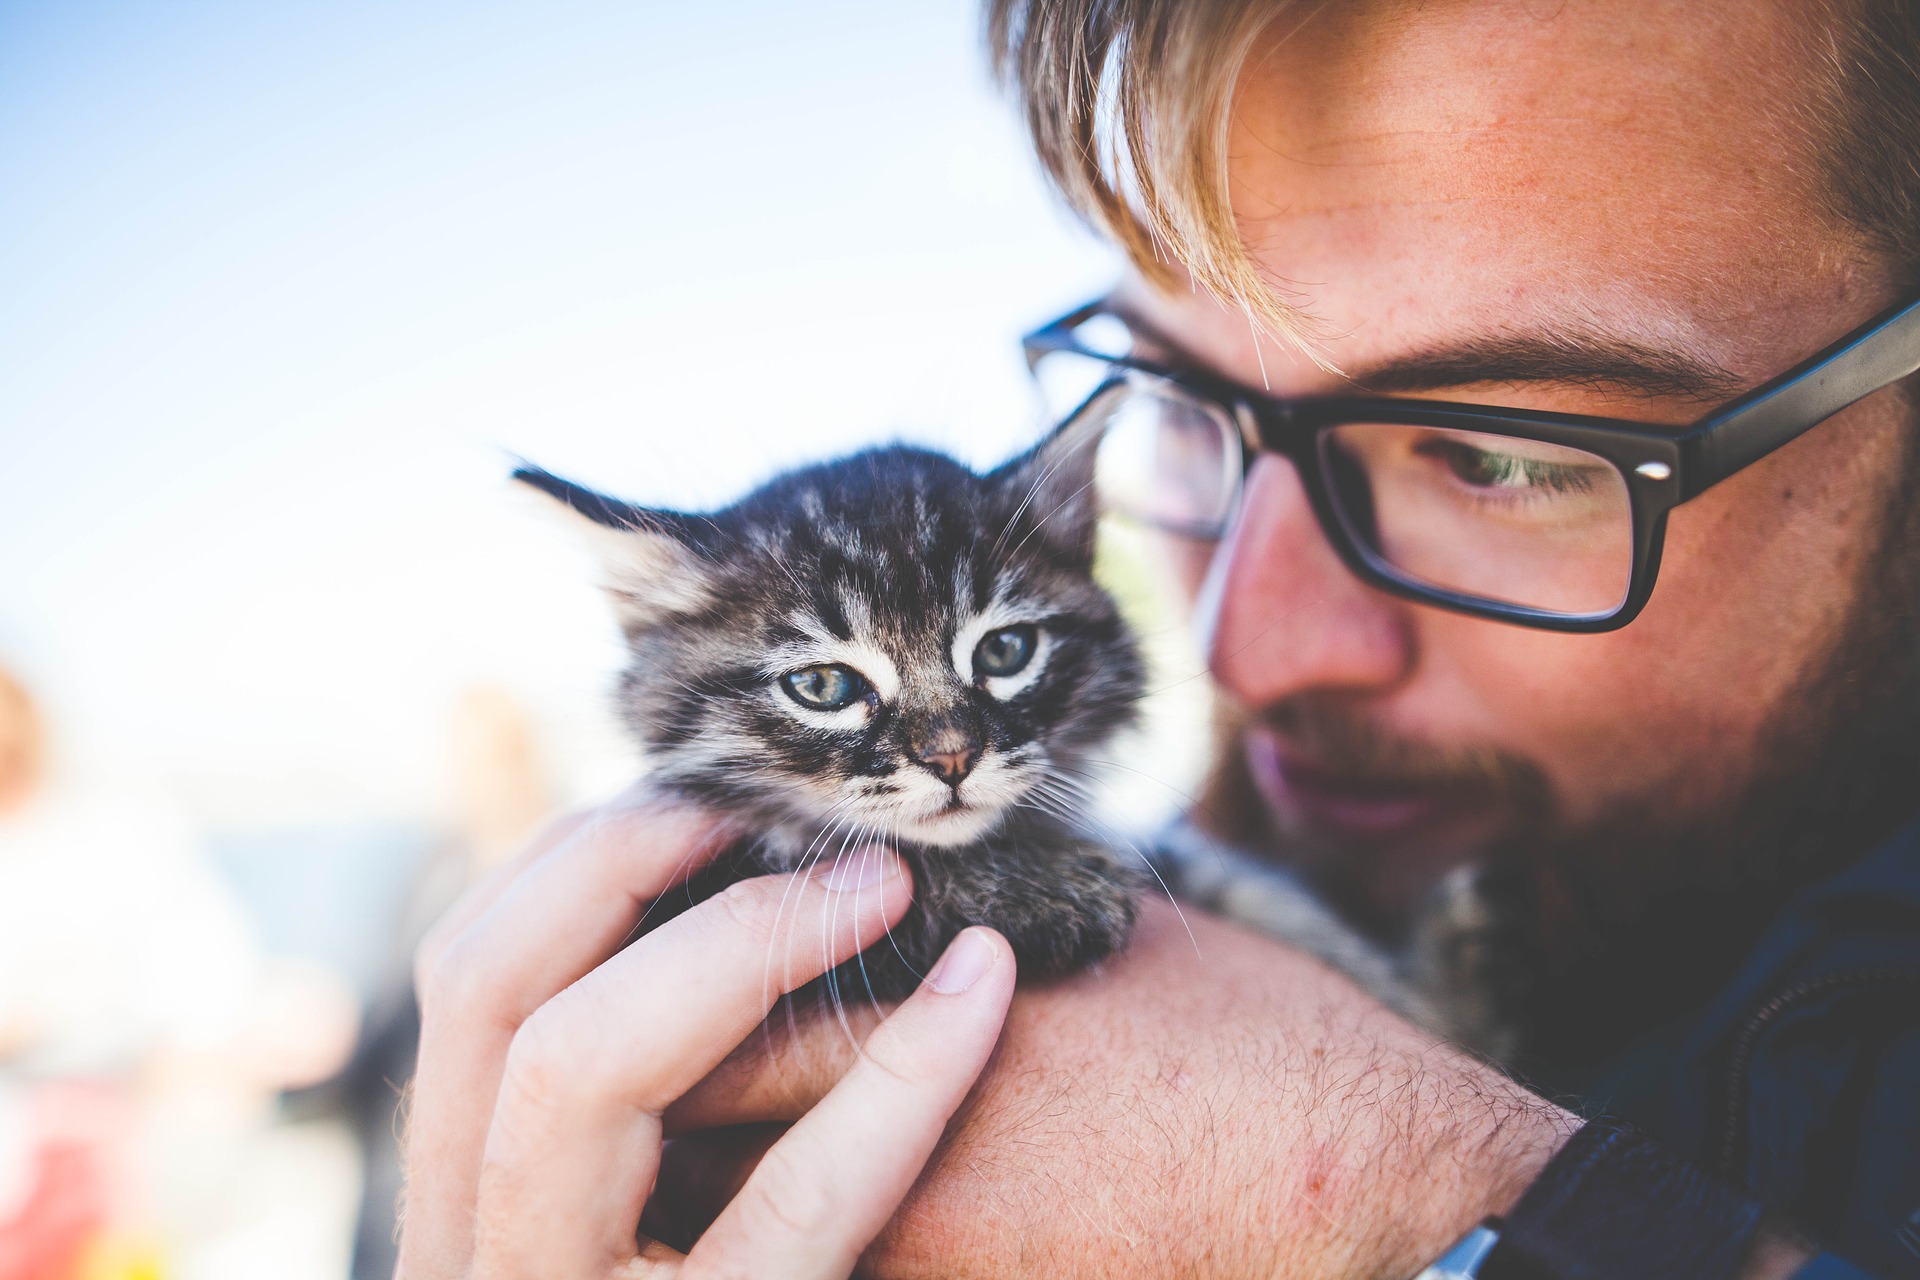 Man with glasses holds cute kitten